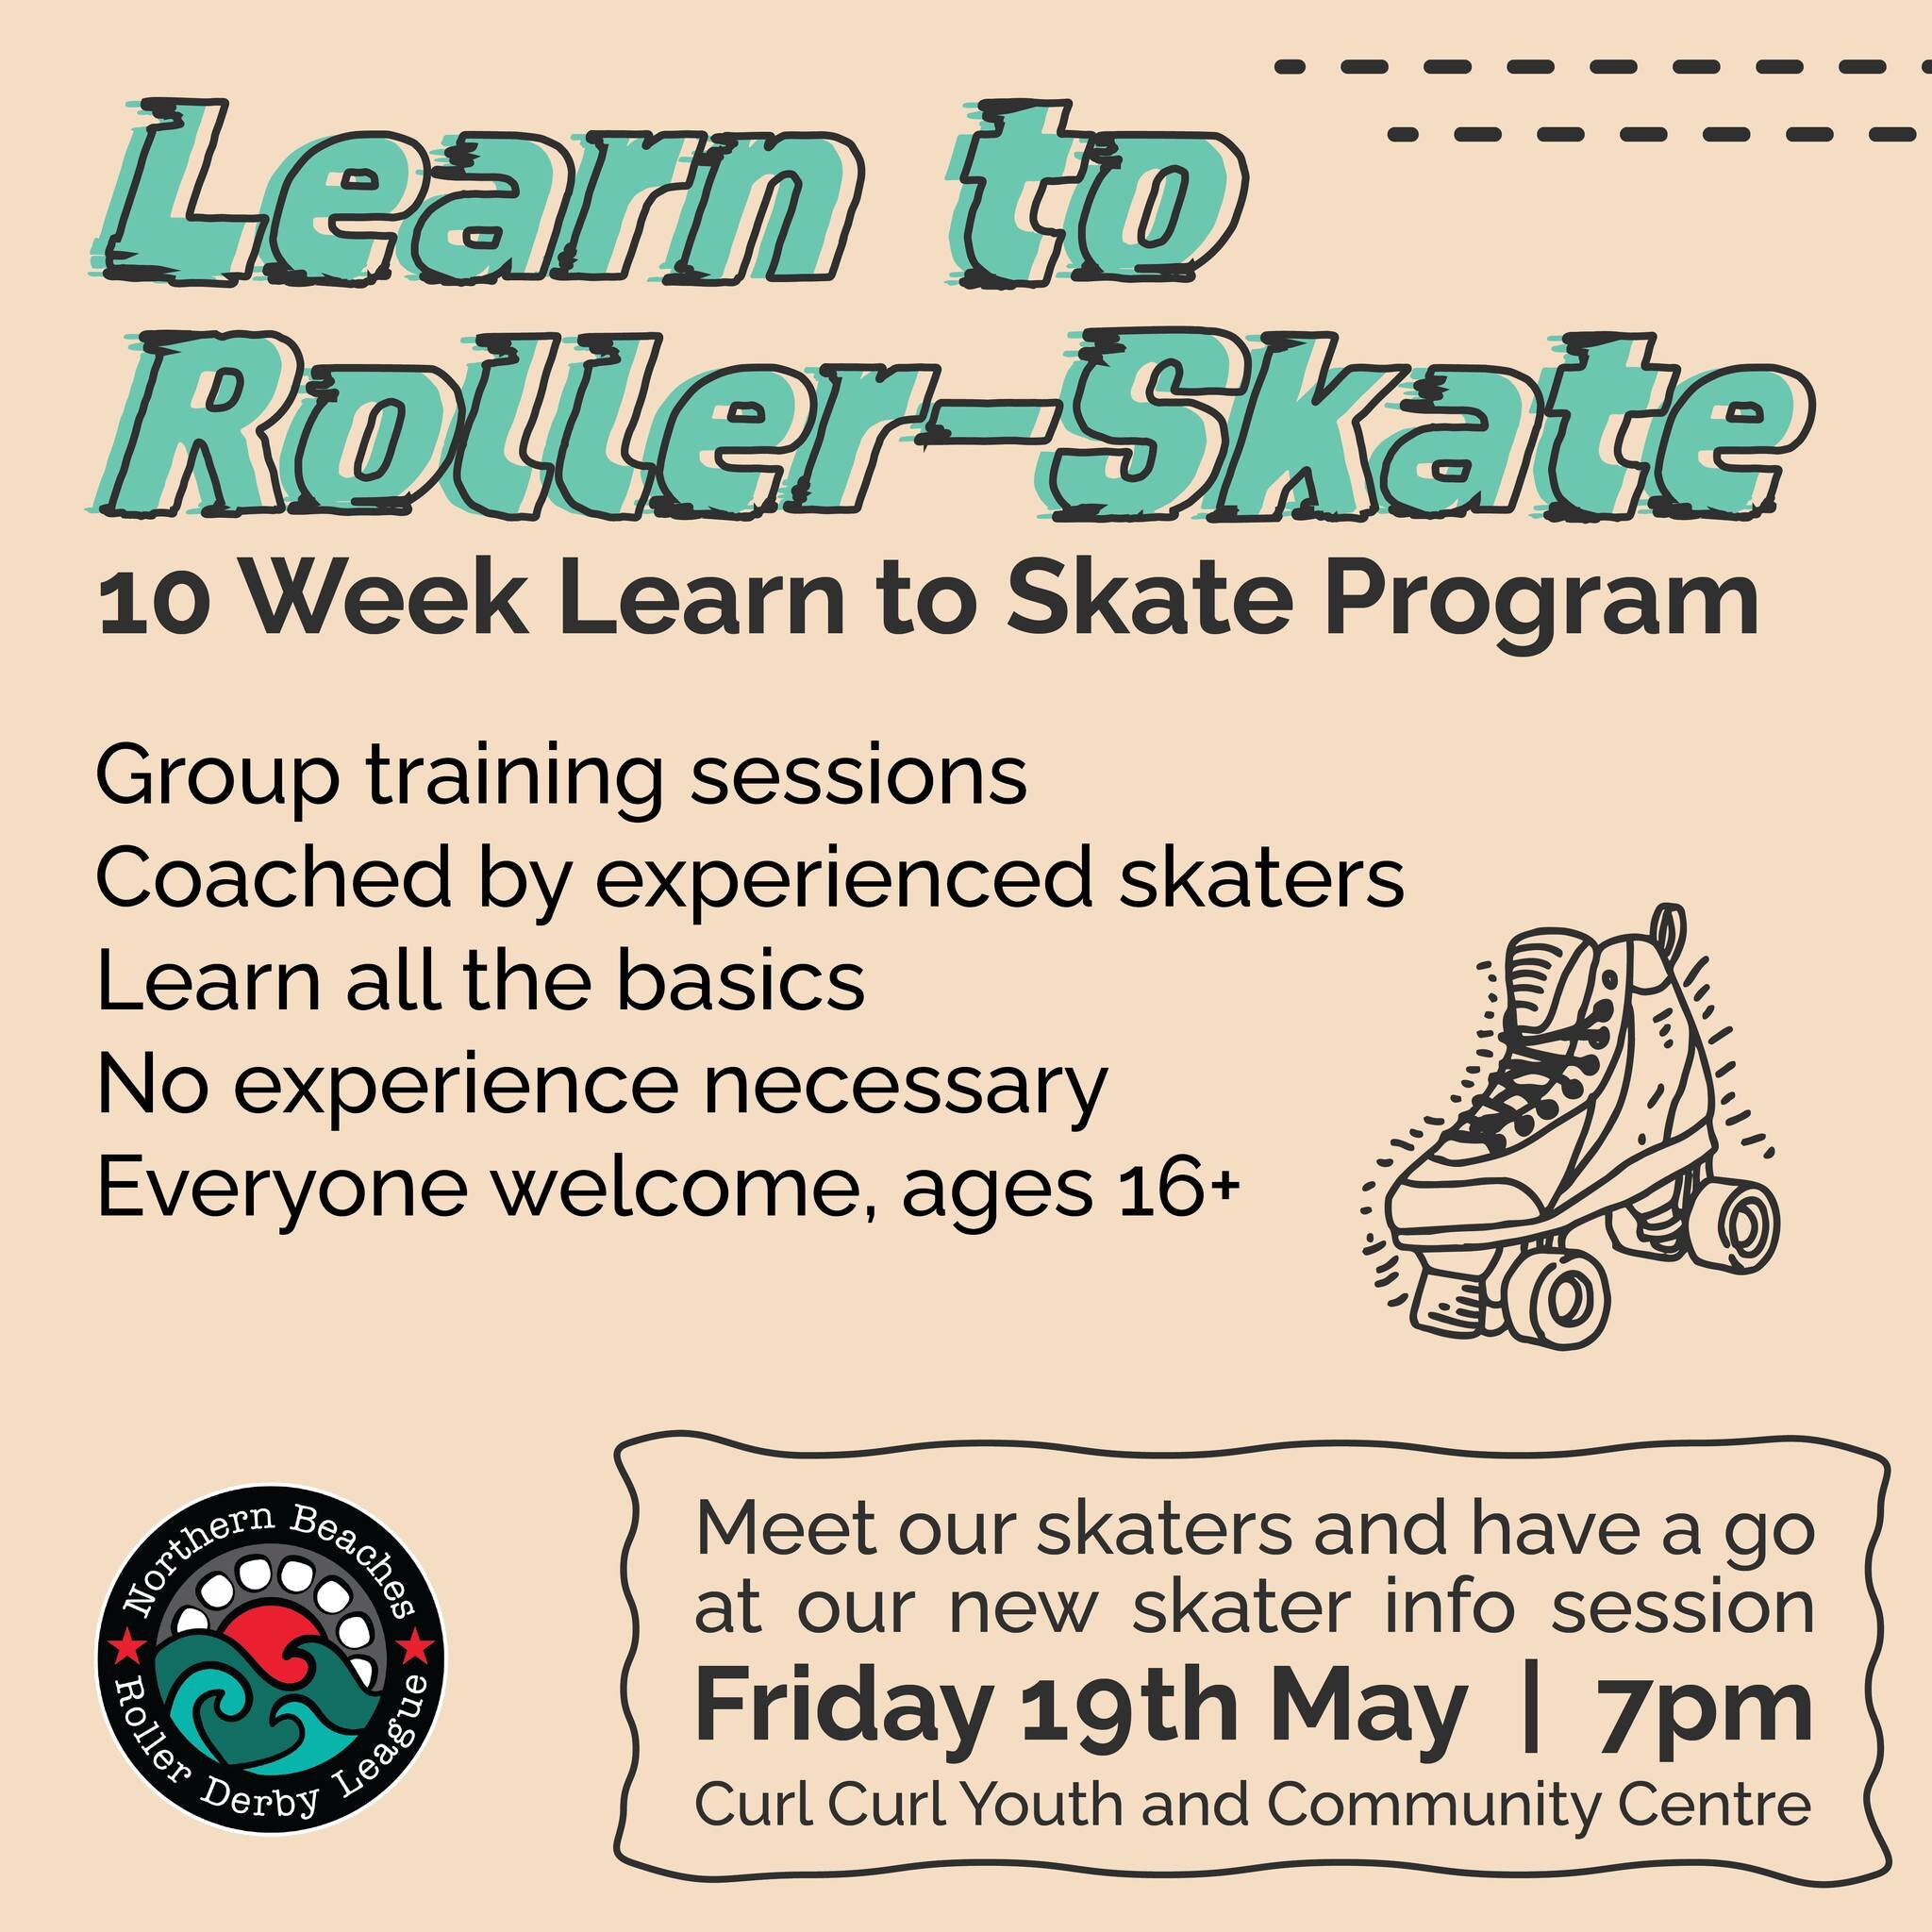 We're looking for some awesome new skatey-friends! Our New Skater Info Session is coming up on Friday 19th May, and we'd love to meet you! Check out our facebook event for all the info. 
.
.
#rollerskating #rollerskatepractice #rollerderby #jamskatin